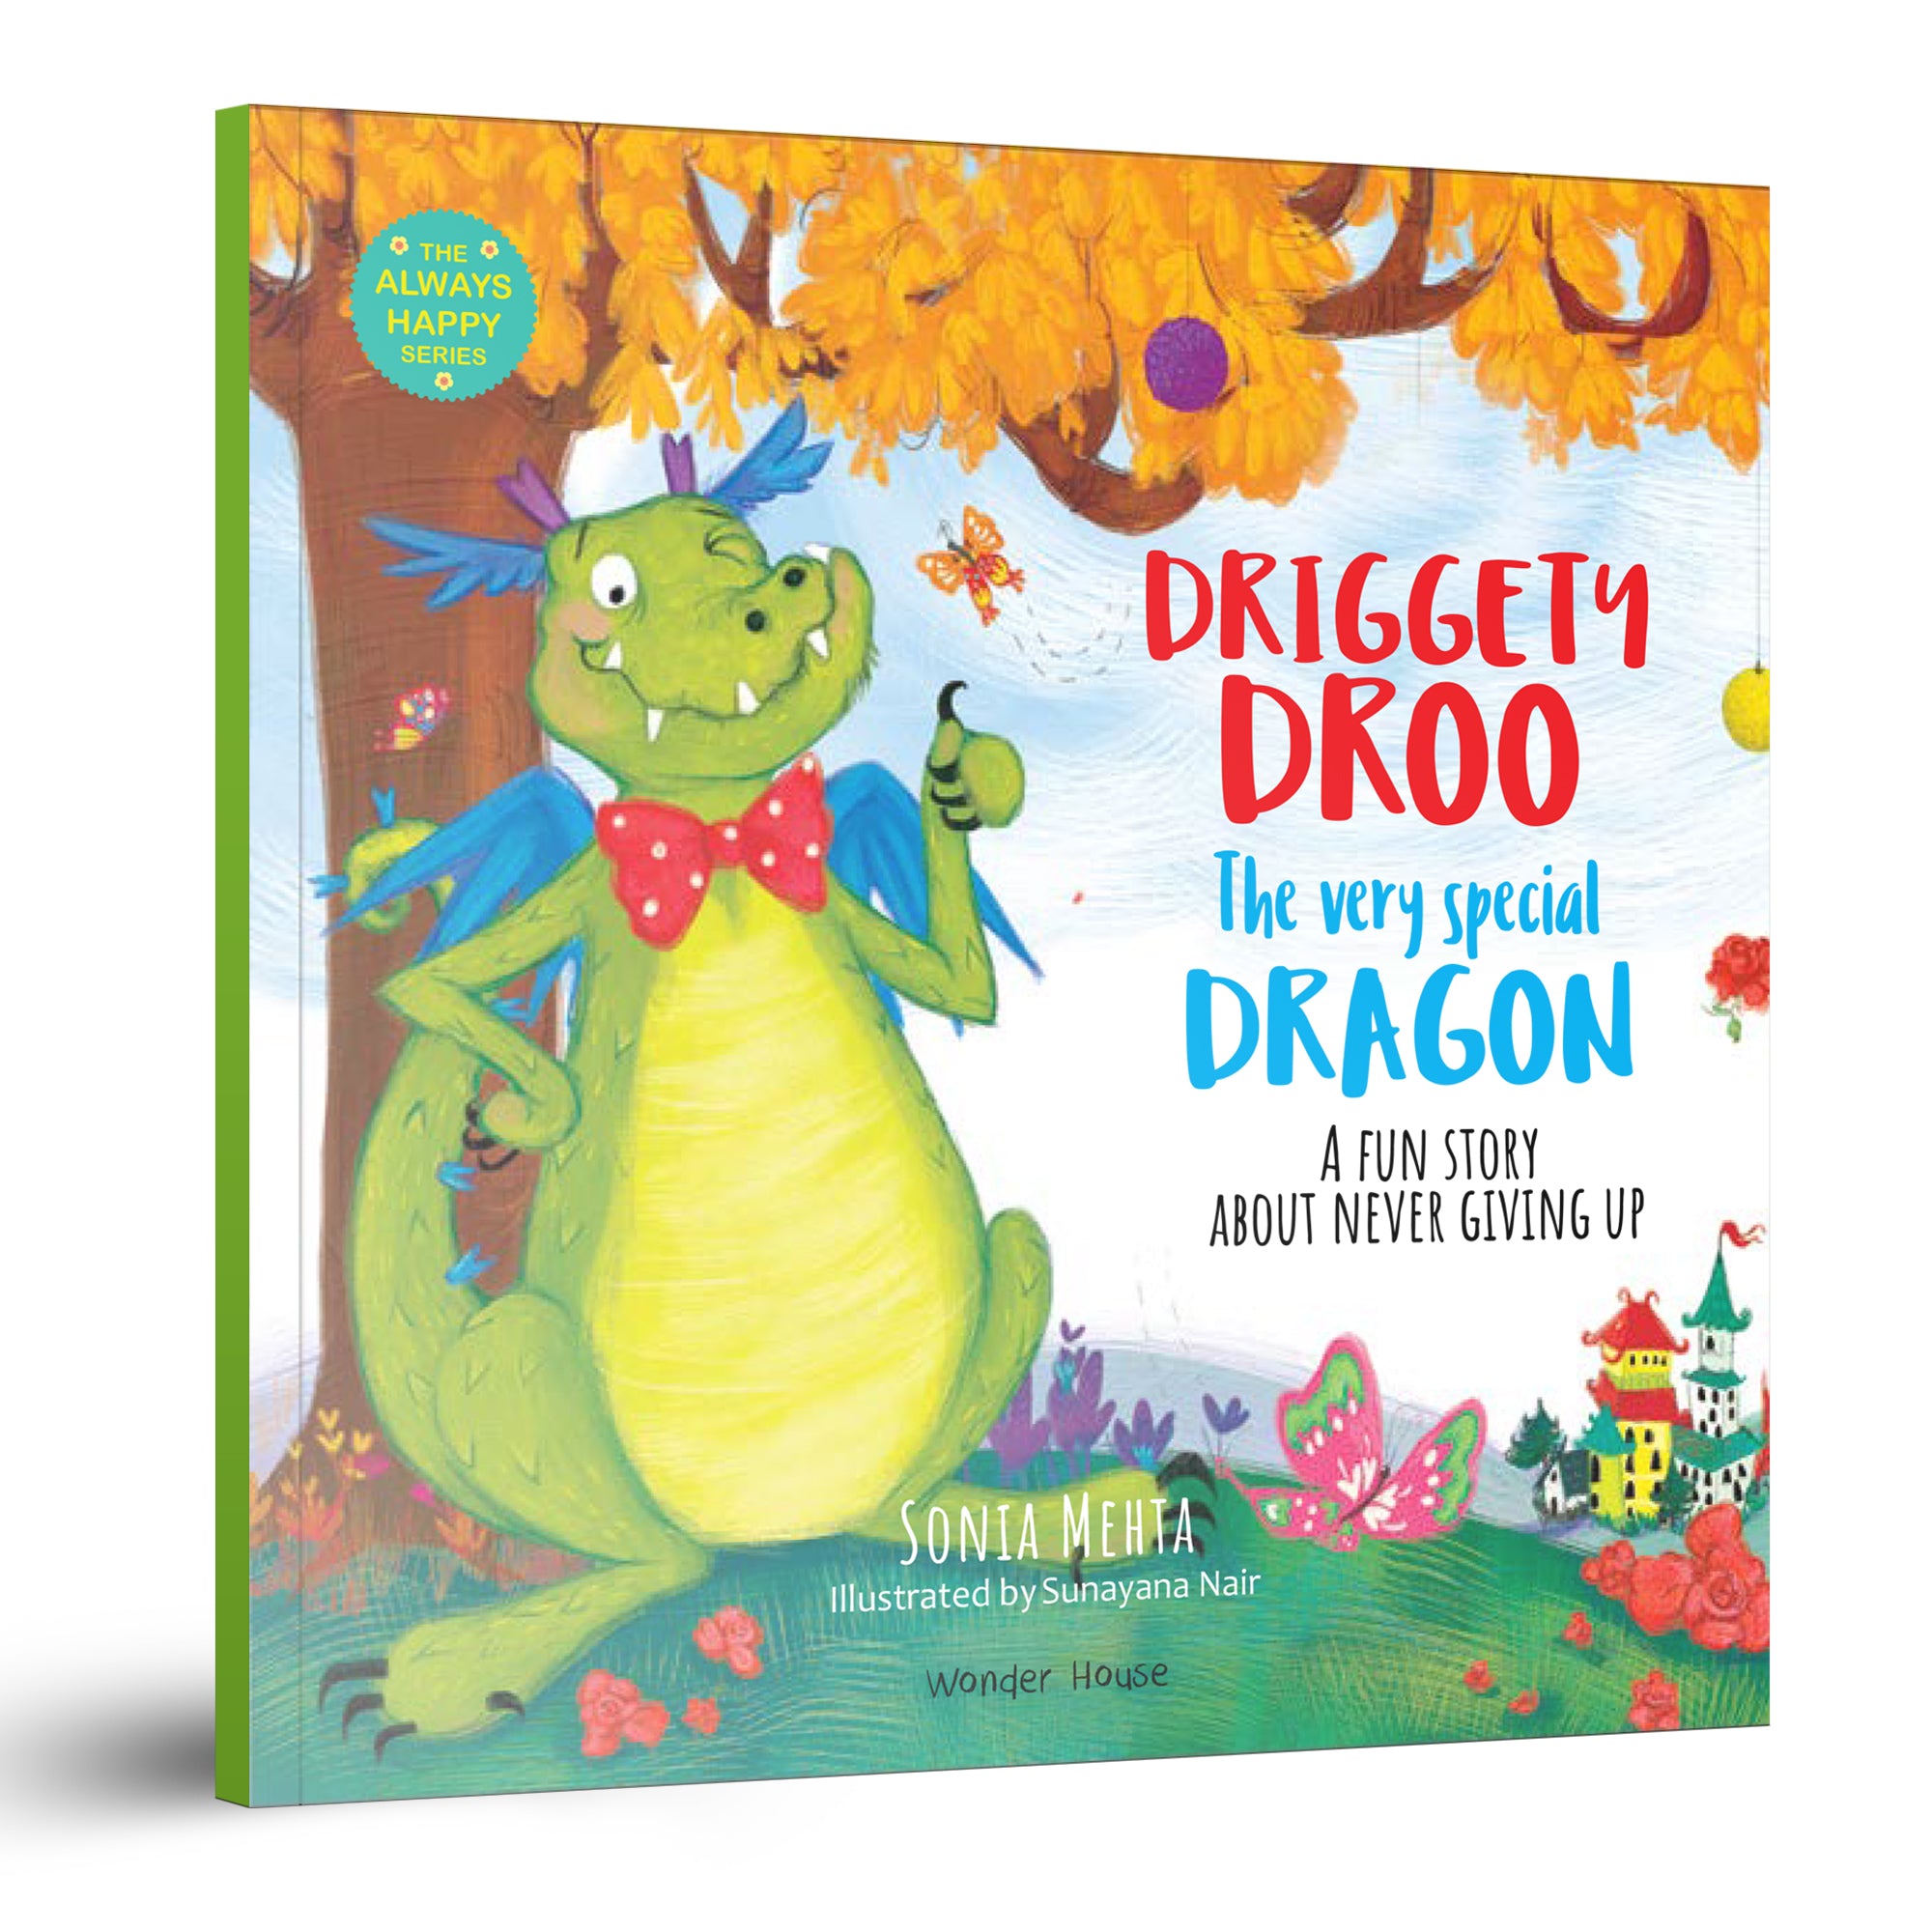 The Always Happy Series: Driggety Droo The very Determined Dragon - A fun Story About Never Giving Up - Beautifully Illustrated Picture Book For Children